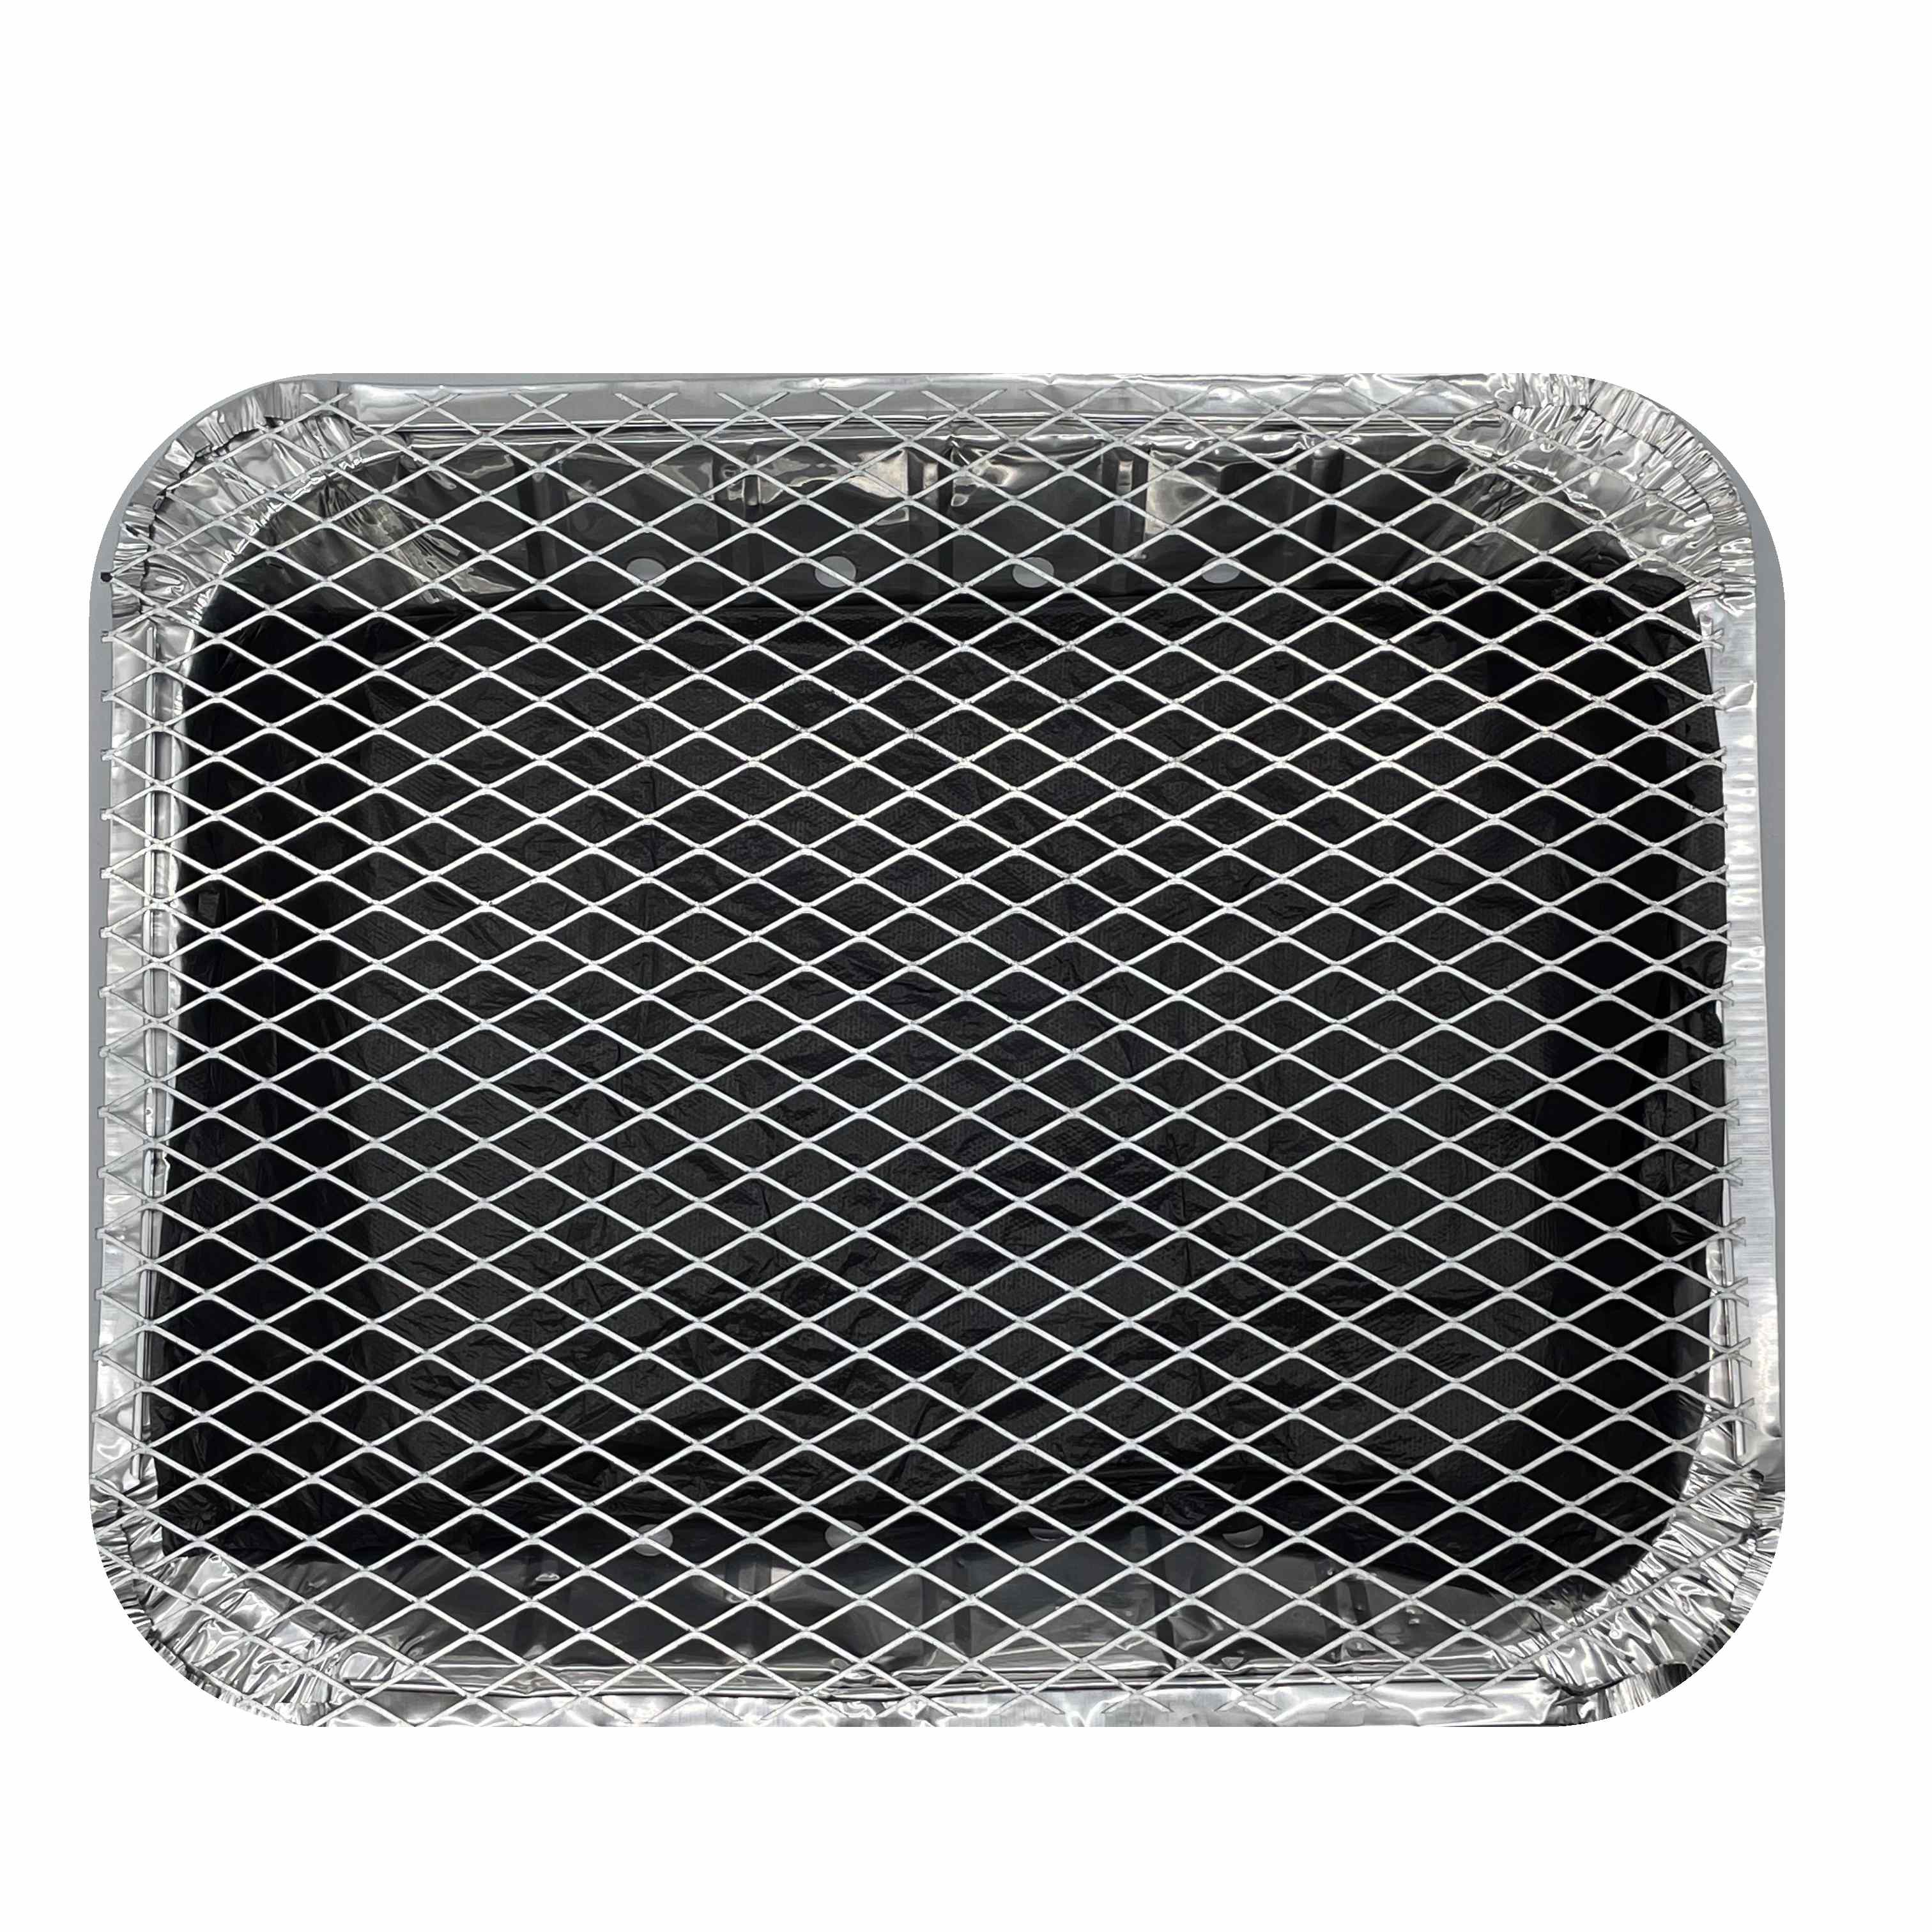 Aluminum Grill Wire Mesh, Technique : Hot Rolled, Feature : Rust